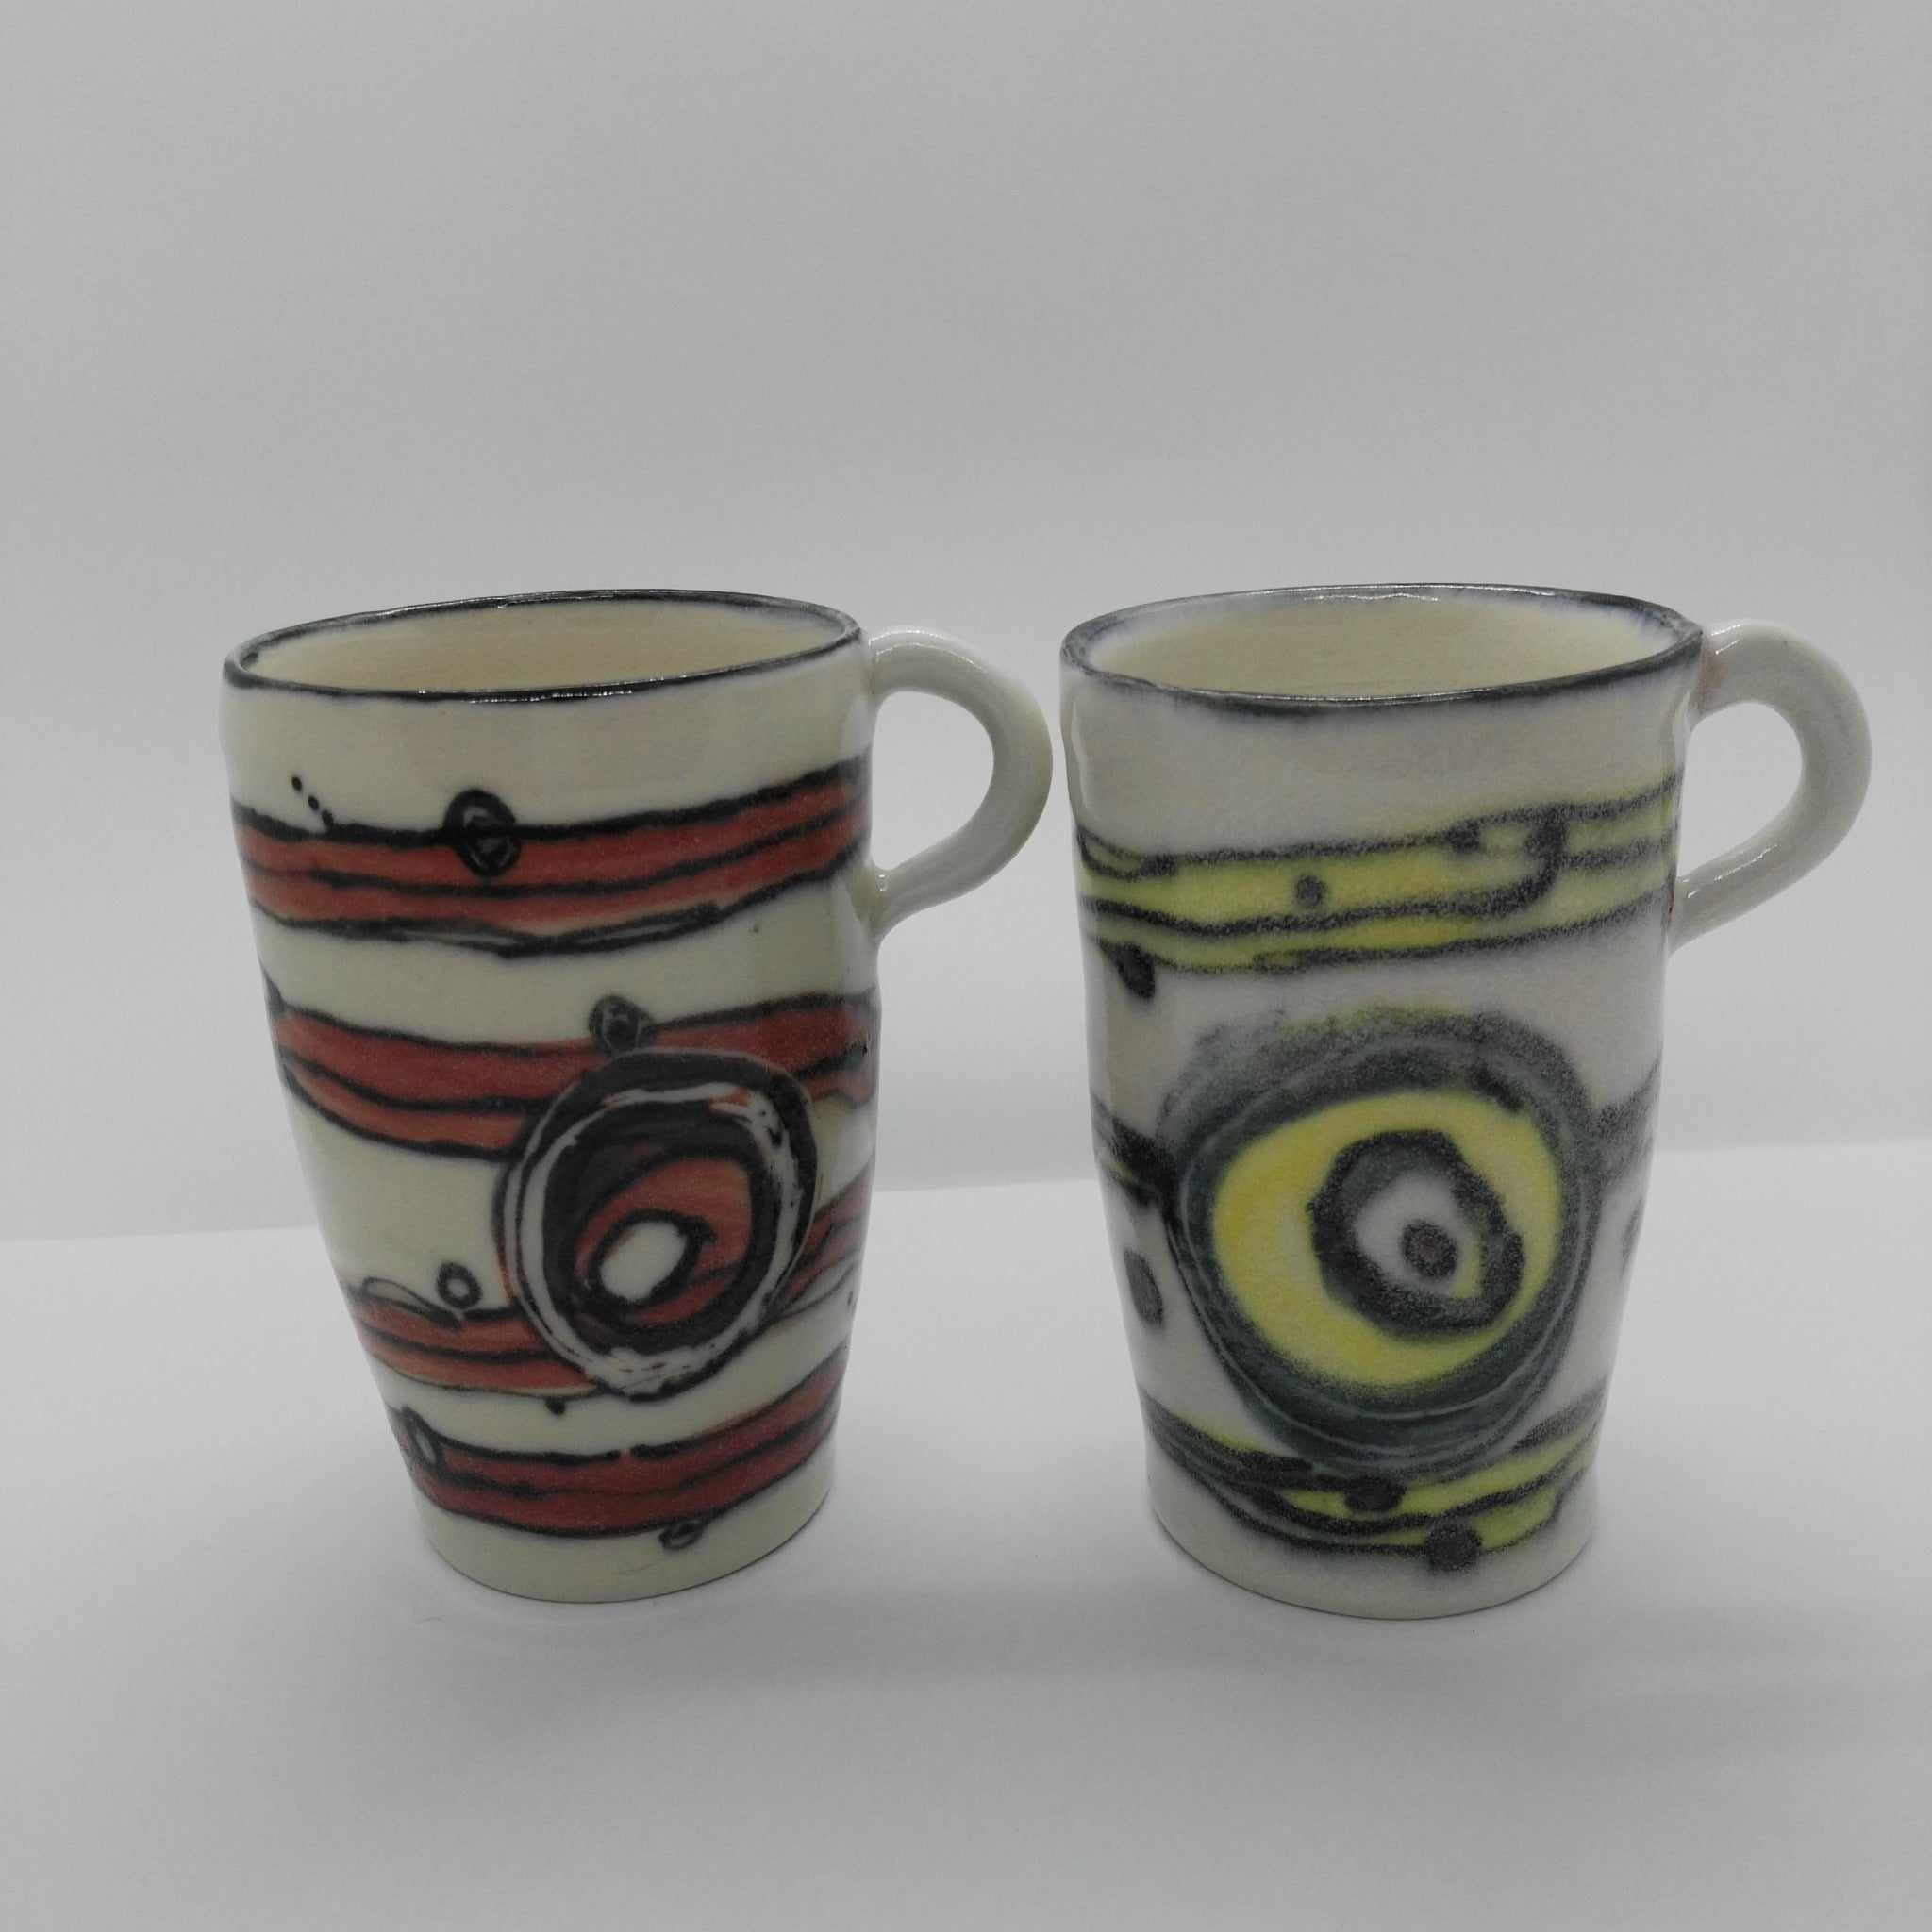 Purchase separately Ceramic mugs (red & green) hand made by Heidi Francis.